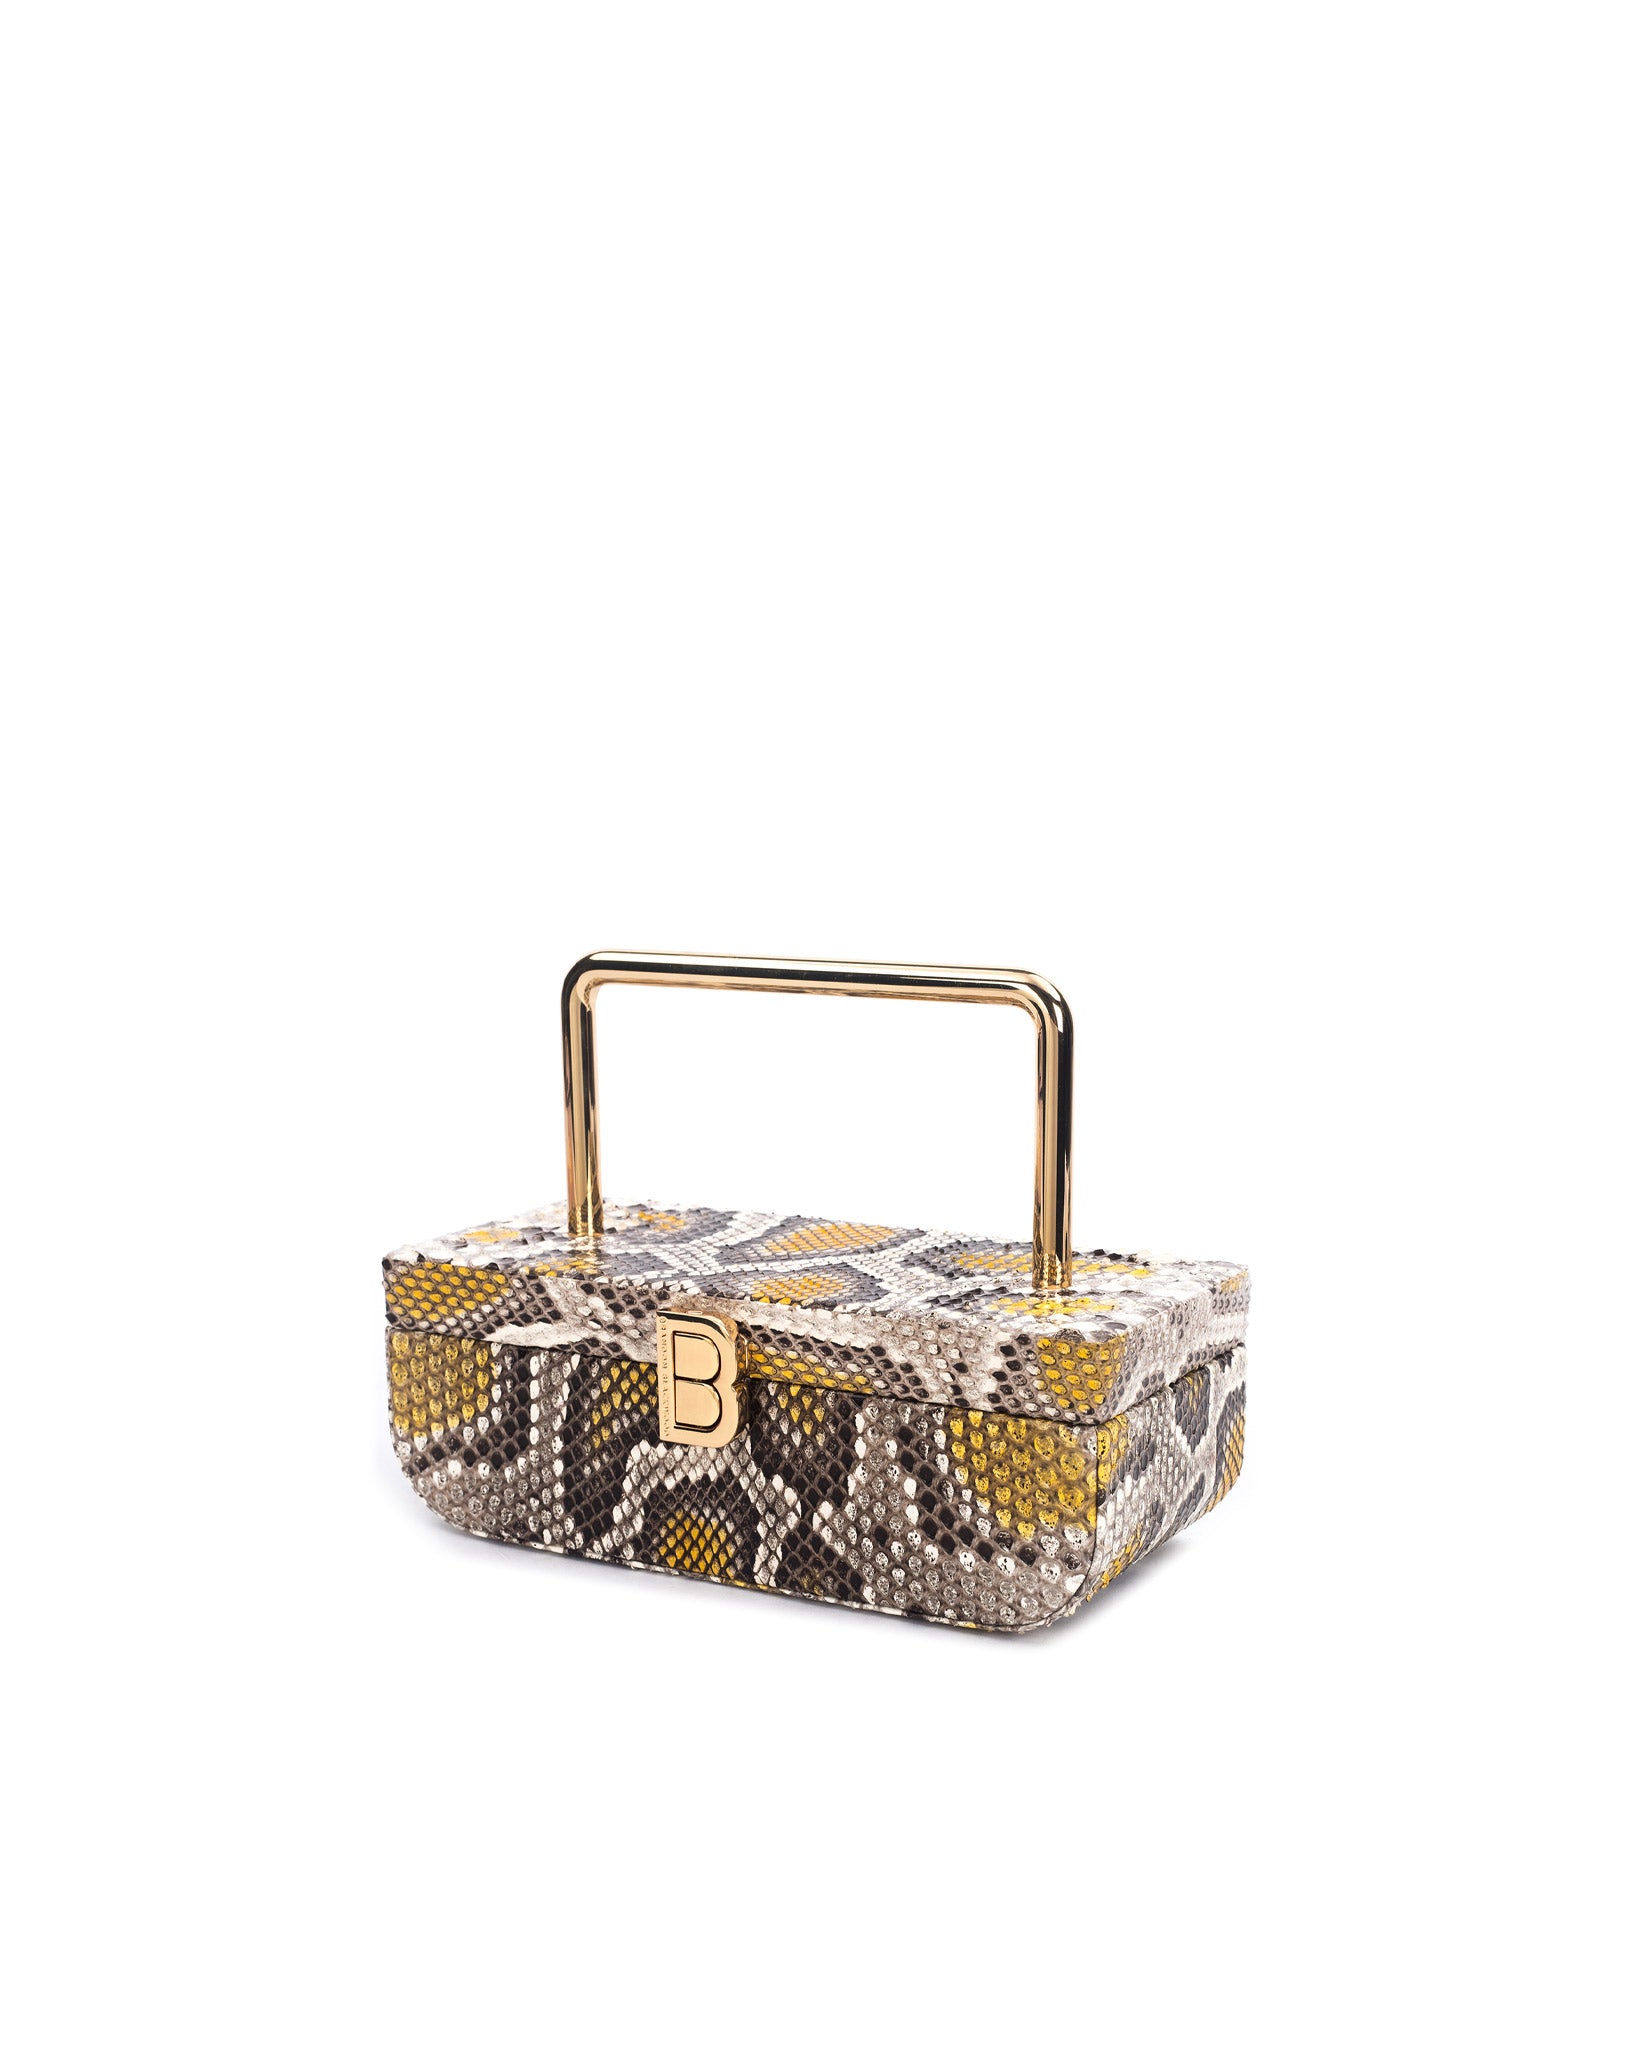 Vanity Purse | 24K Gold Plated Hardware